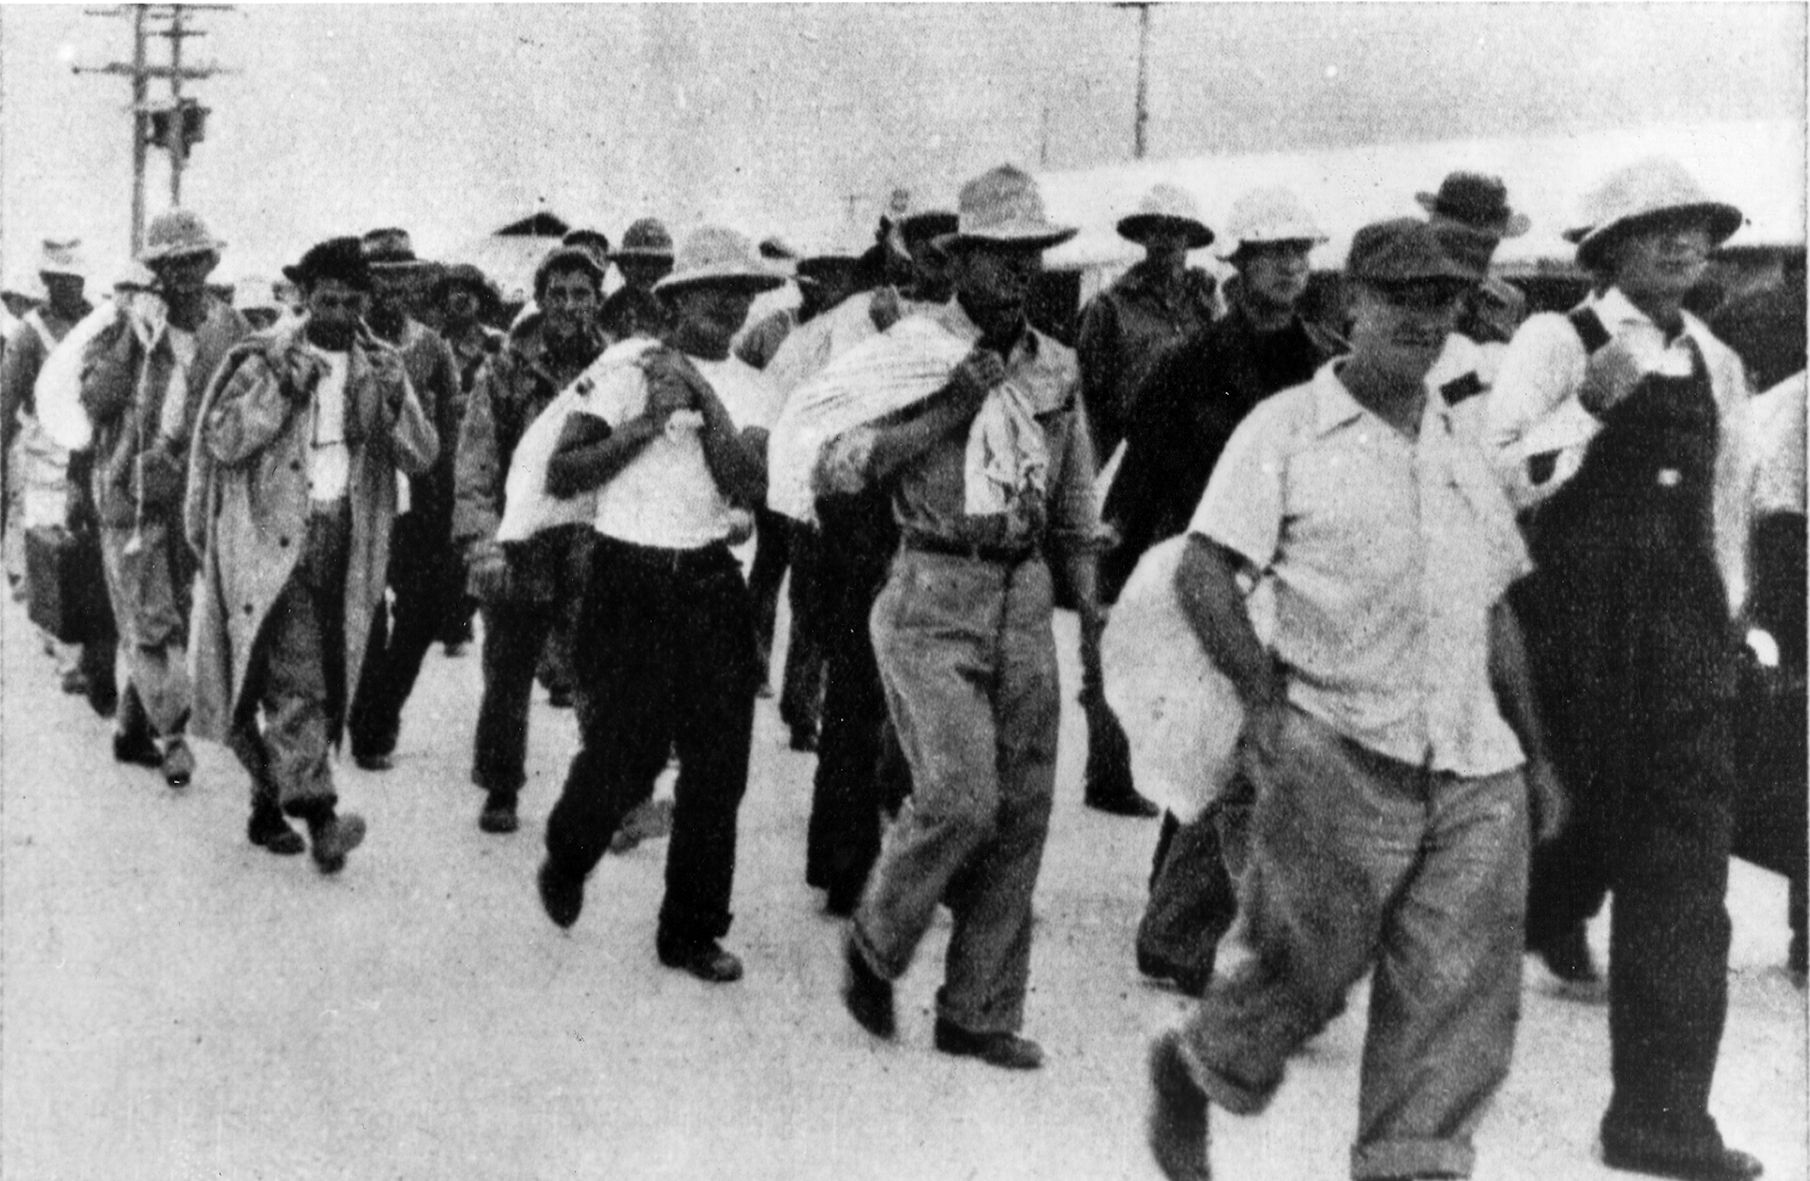 Prisoners of the Japanese, U.S. military and civilian personnel are marched to the waiting transport ship Nita Maru on Wake Island on January 12, 1942. Several of the prisoners are wearing sun helmets similar to the one brought home by Glen Binge.